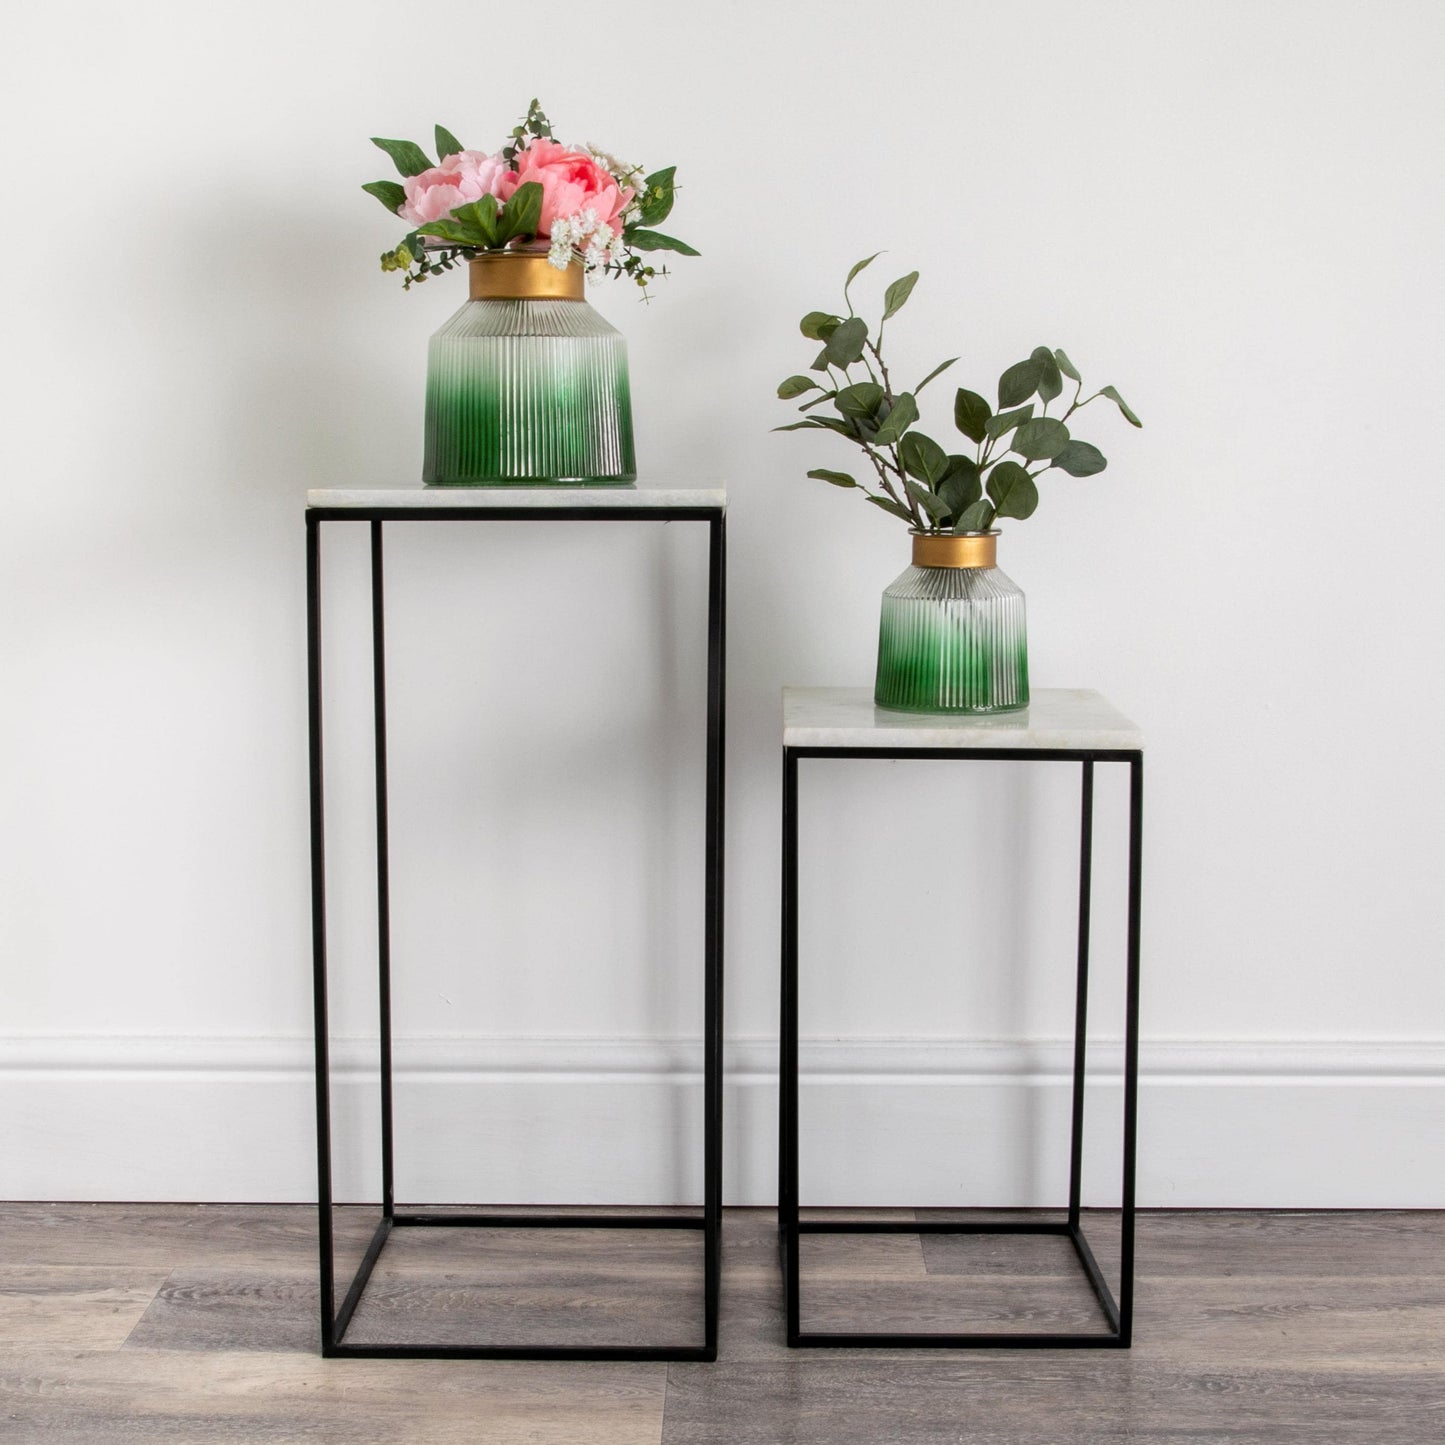 Marble Display Tables (Set of 2)